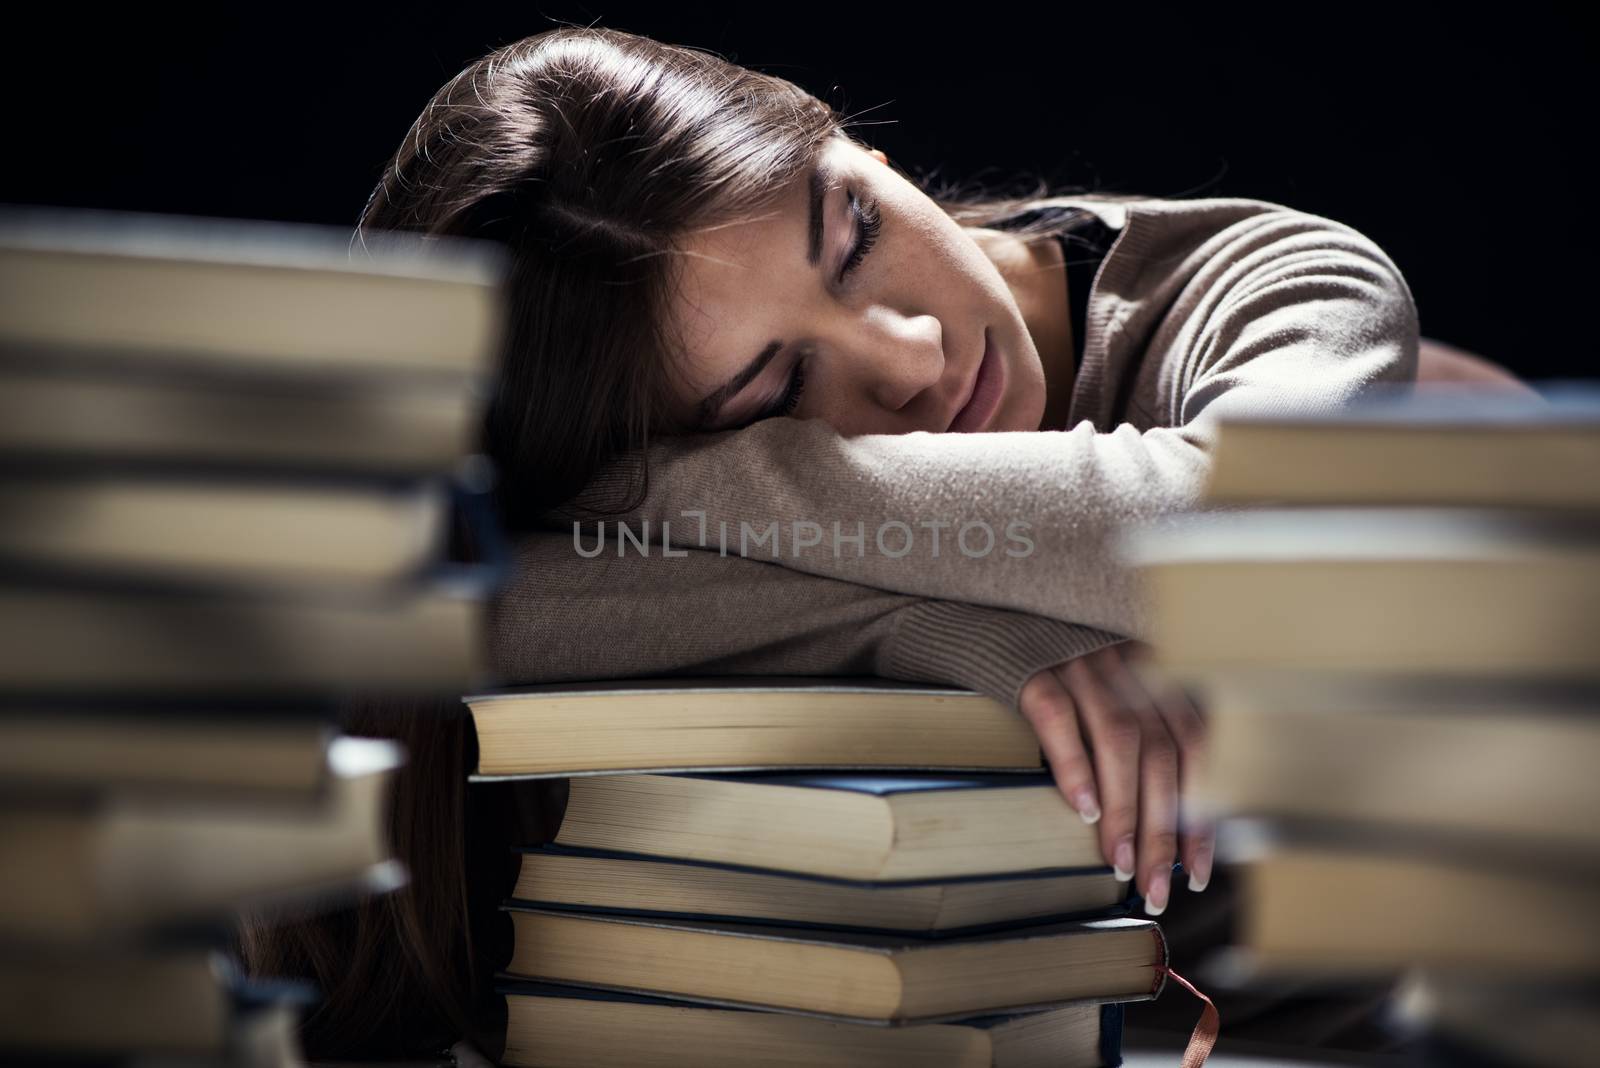 Tired student girl by MilanMarkovic78